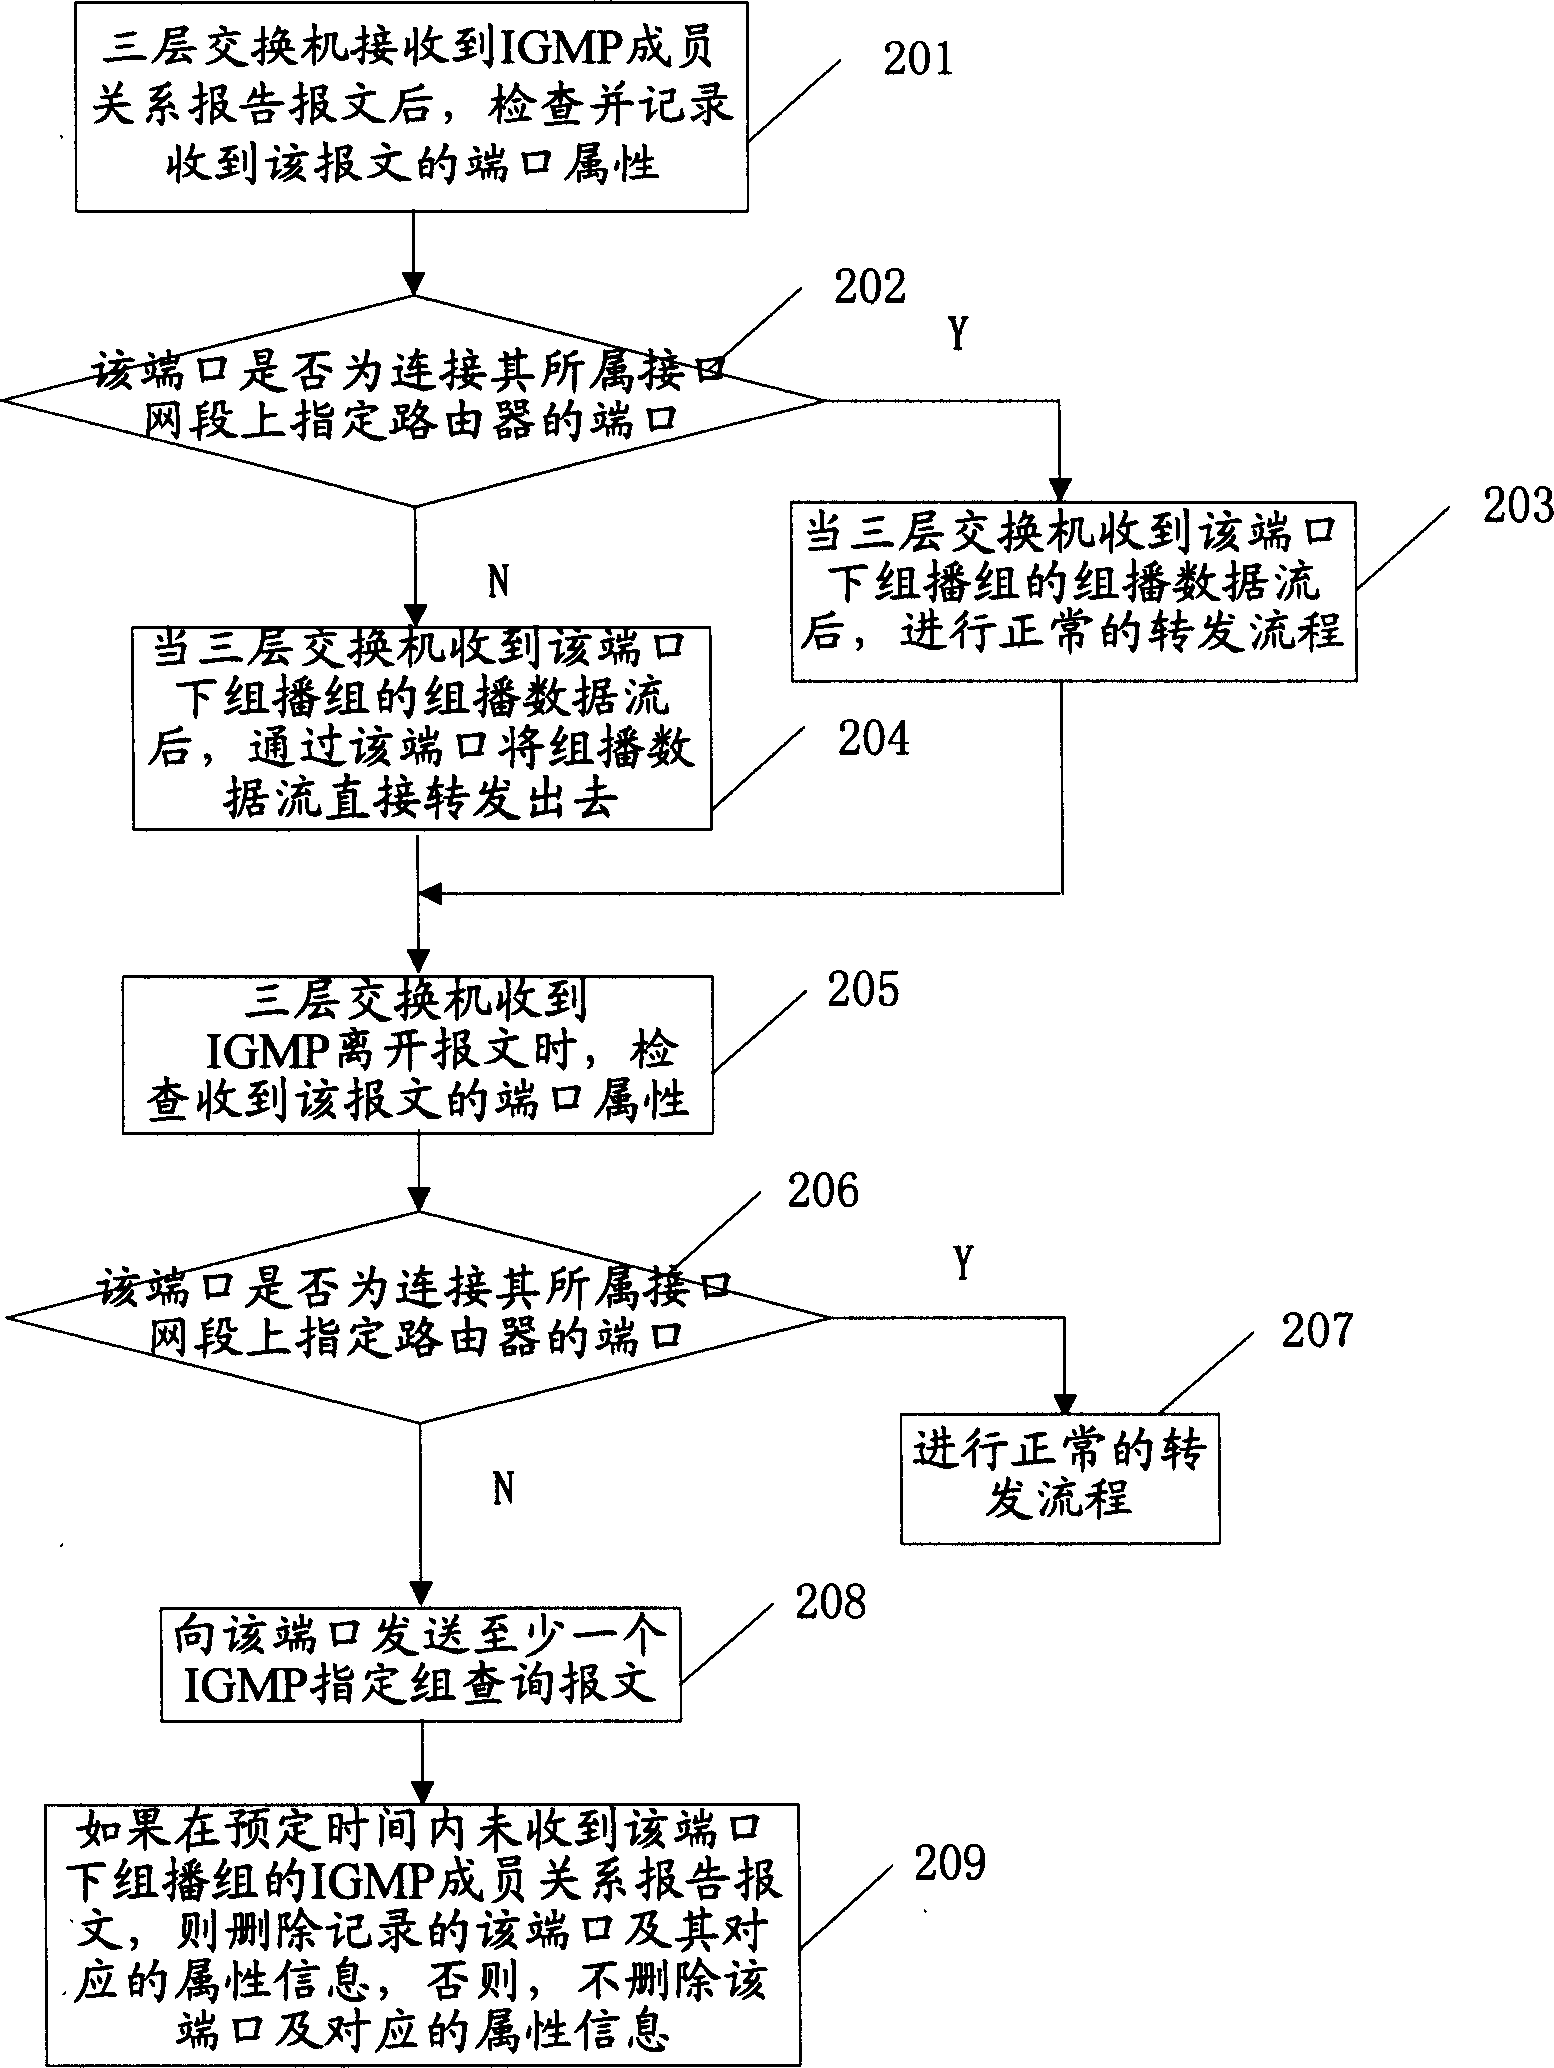 Method for realizing multicast translation in three-layer switching unit